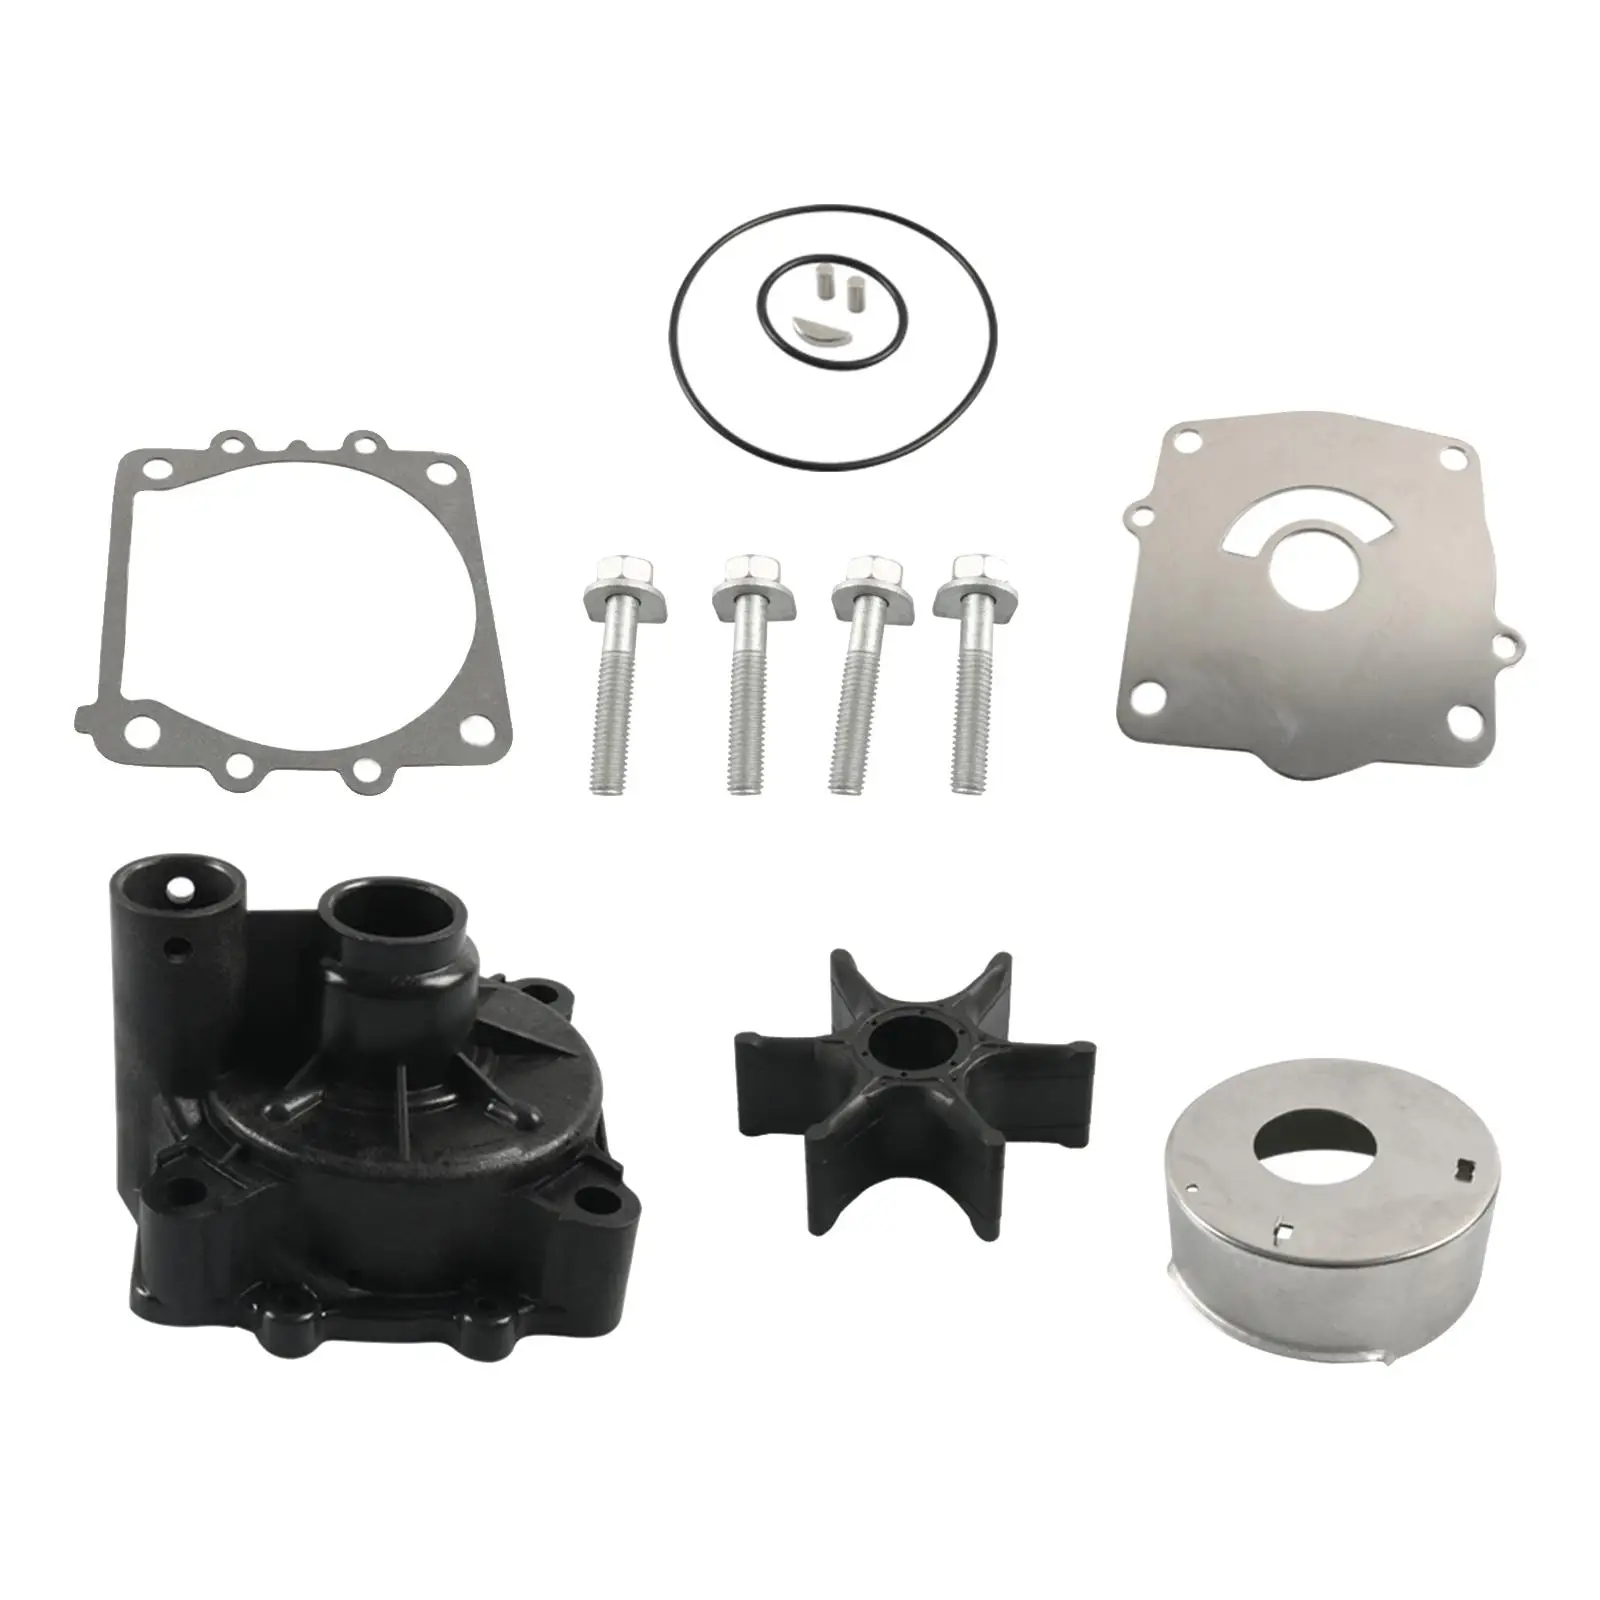 Water Pump Set Replaces Spare Parts 61a-w0078-a2-00 Outboard Water Pump Set